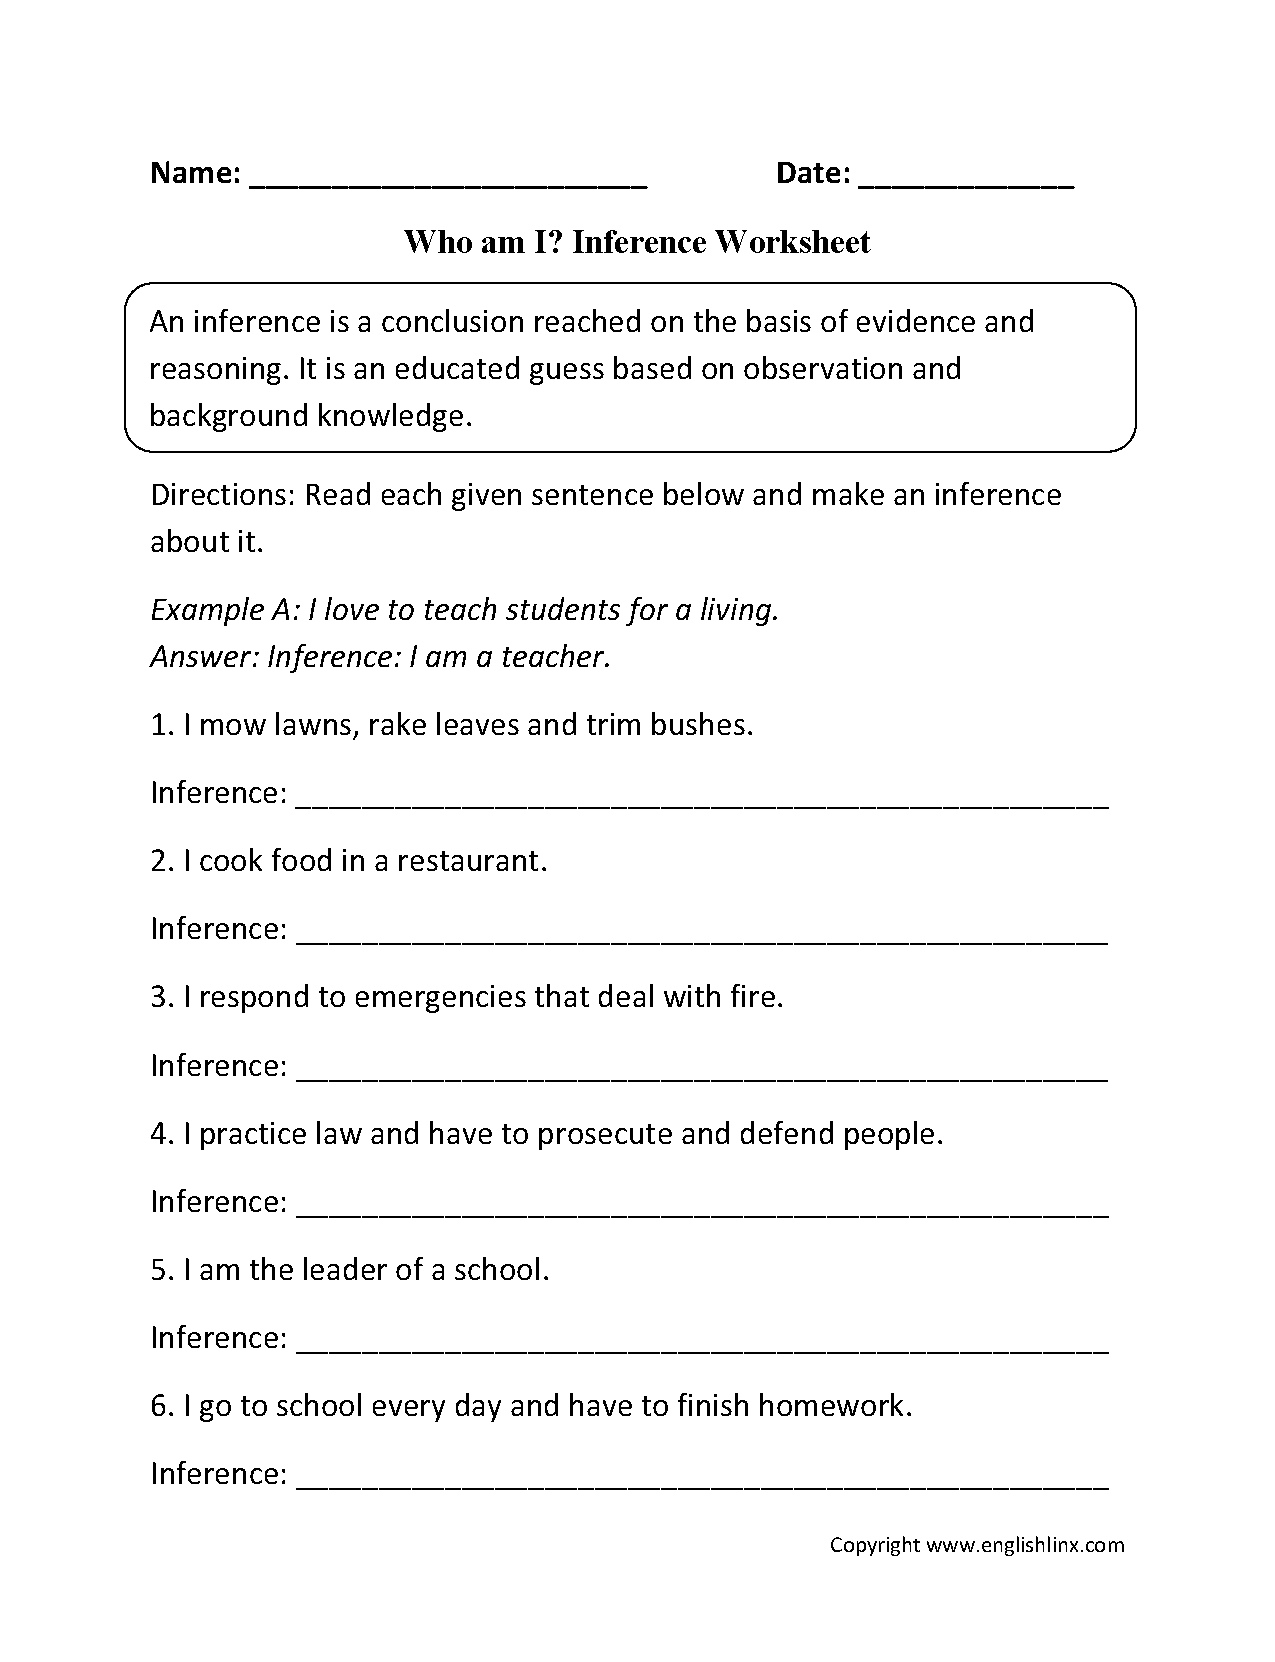 Who Am I? Inference Worksheets | Inferring Lessons